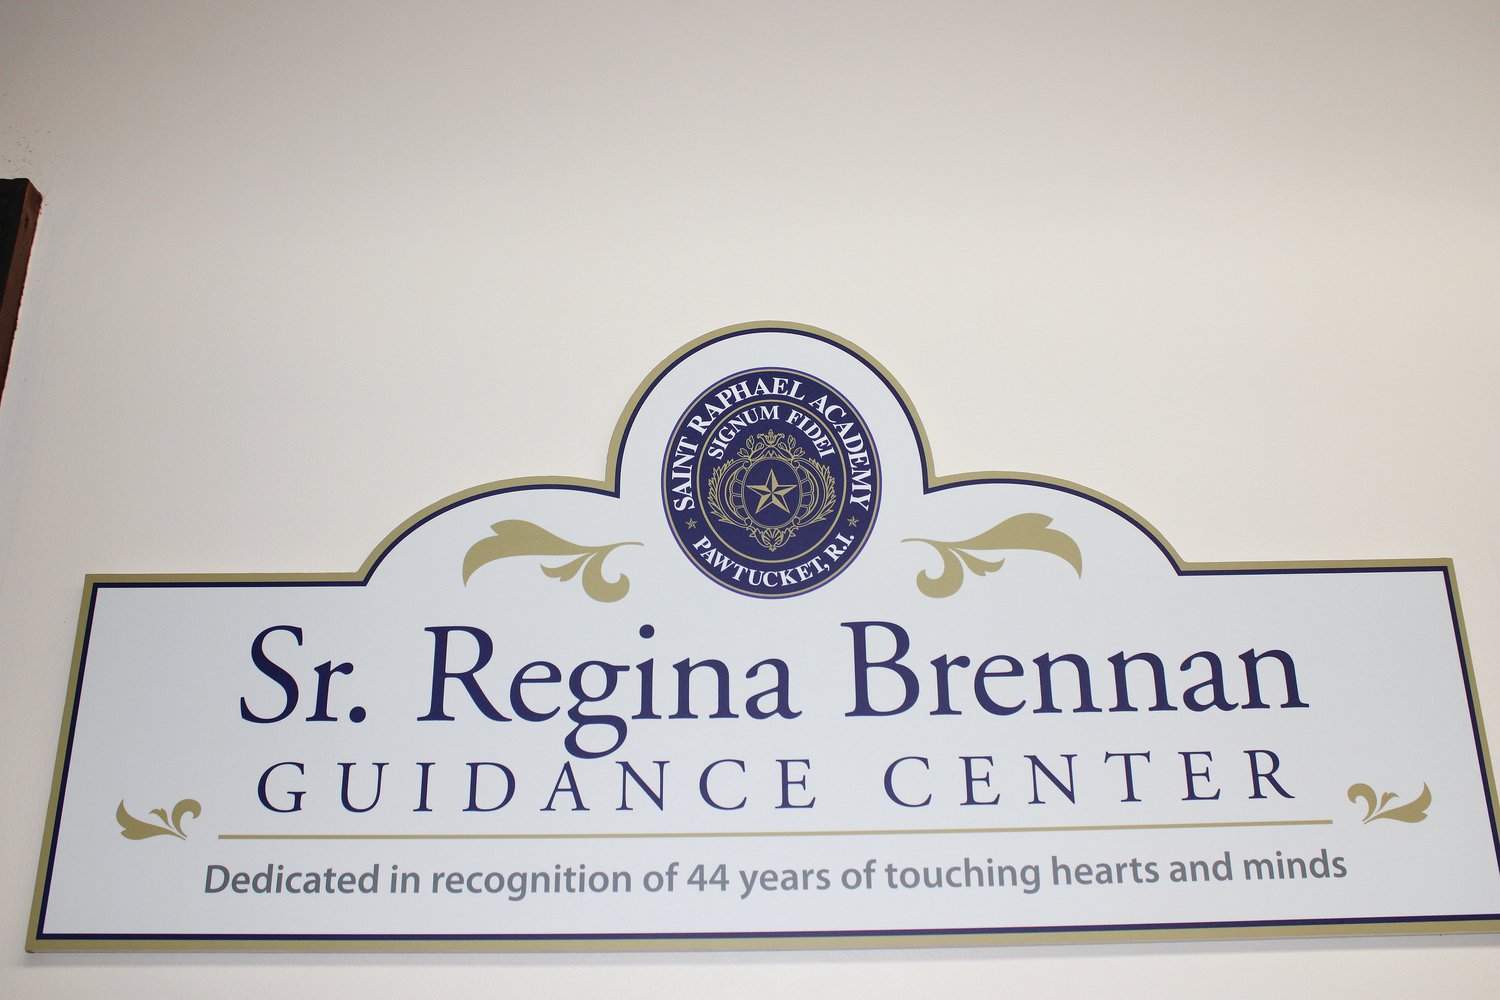 Sister Regina Brennan was honored on September 16 for her 44 years of touching minds and hearts at St. Raphael Academy. The guidance office is now known as the Sister Regina Brennan Guidance Center.